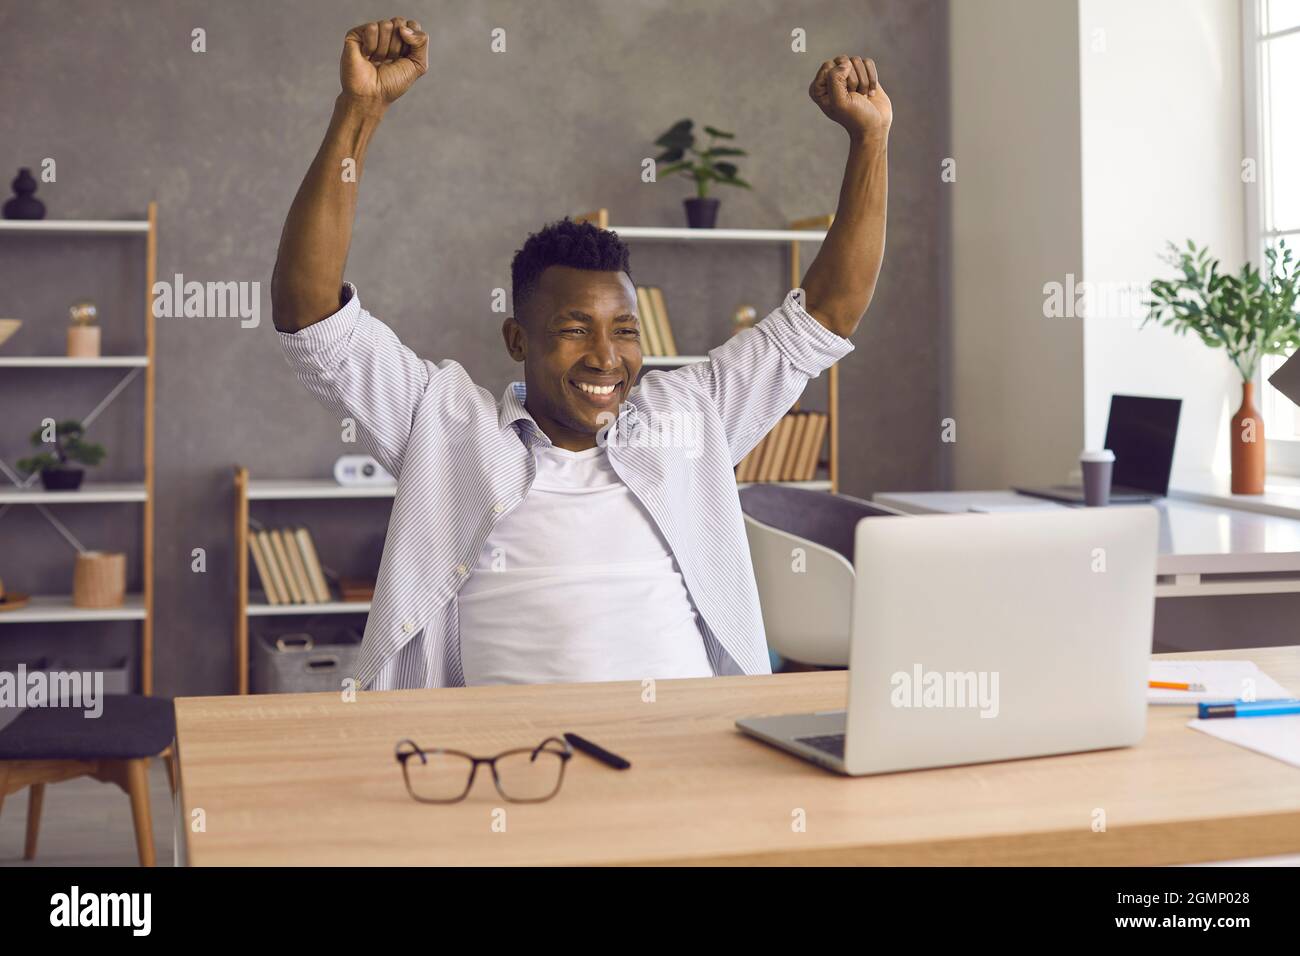 Dark-skinned man happily raises his hands after receiving good news or achieving desired goal. Stock Photo